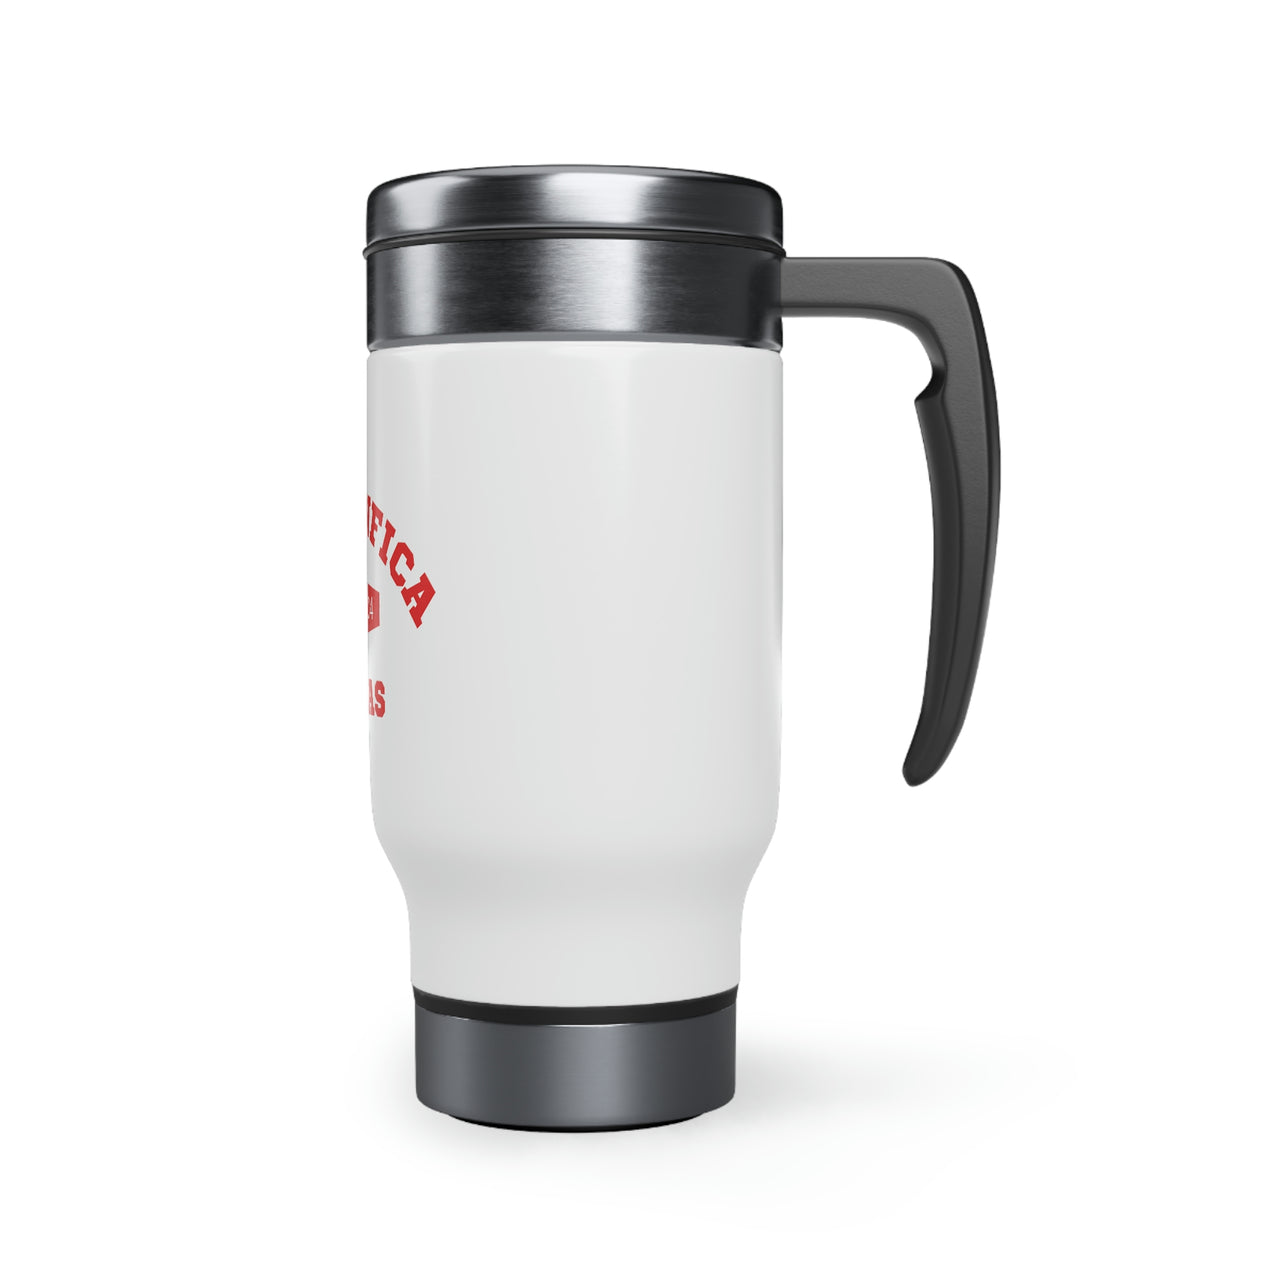 Benfica Stainless Steel Travel Mug with Handle, 14oz